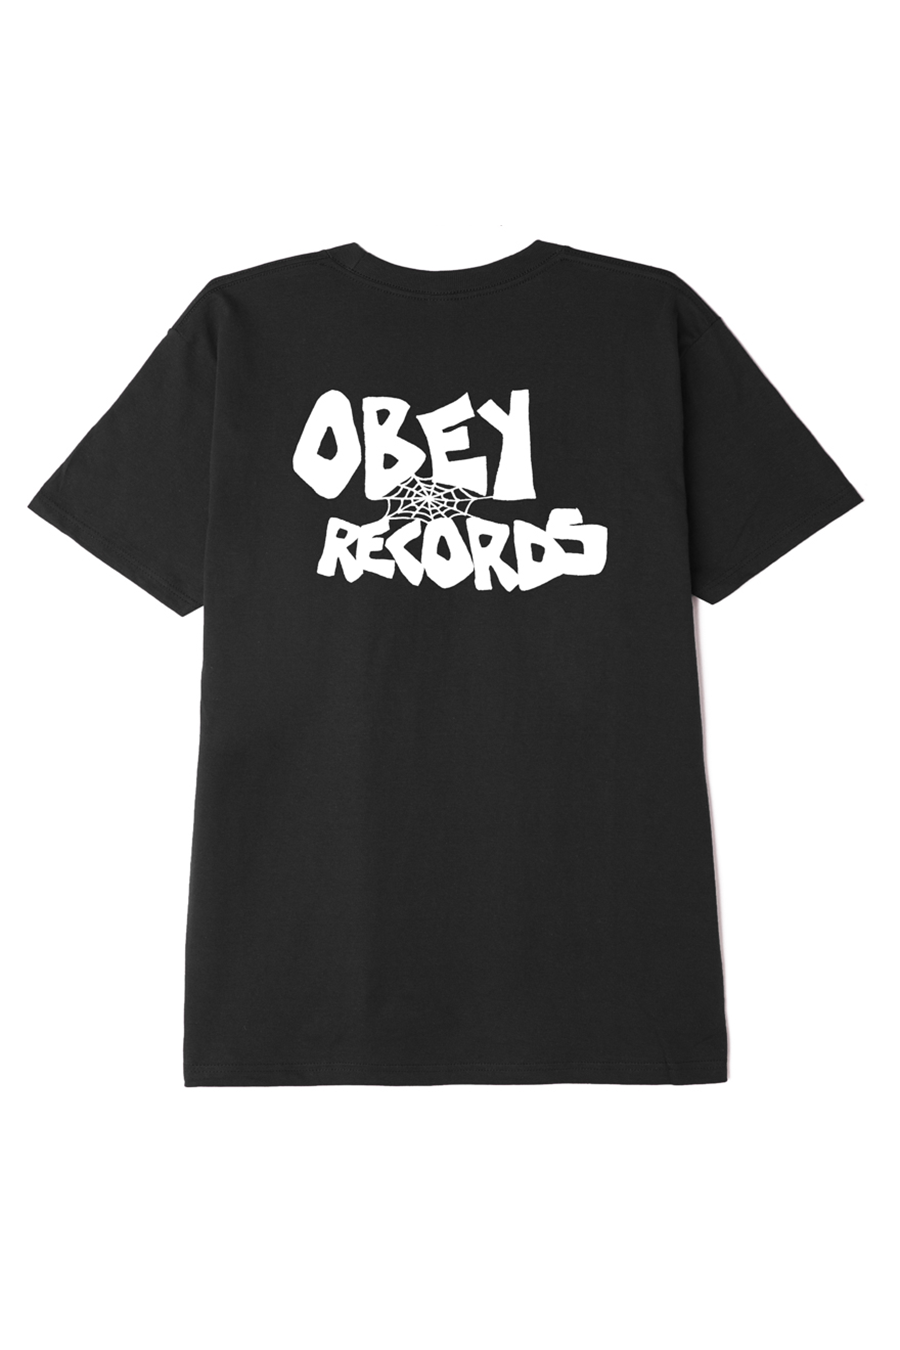 Obey Records Web Tee | Black - Main Image Number 2 of 2